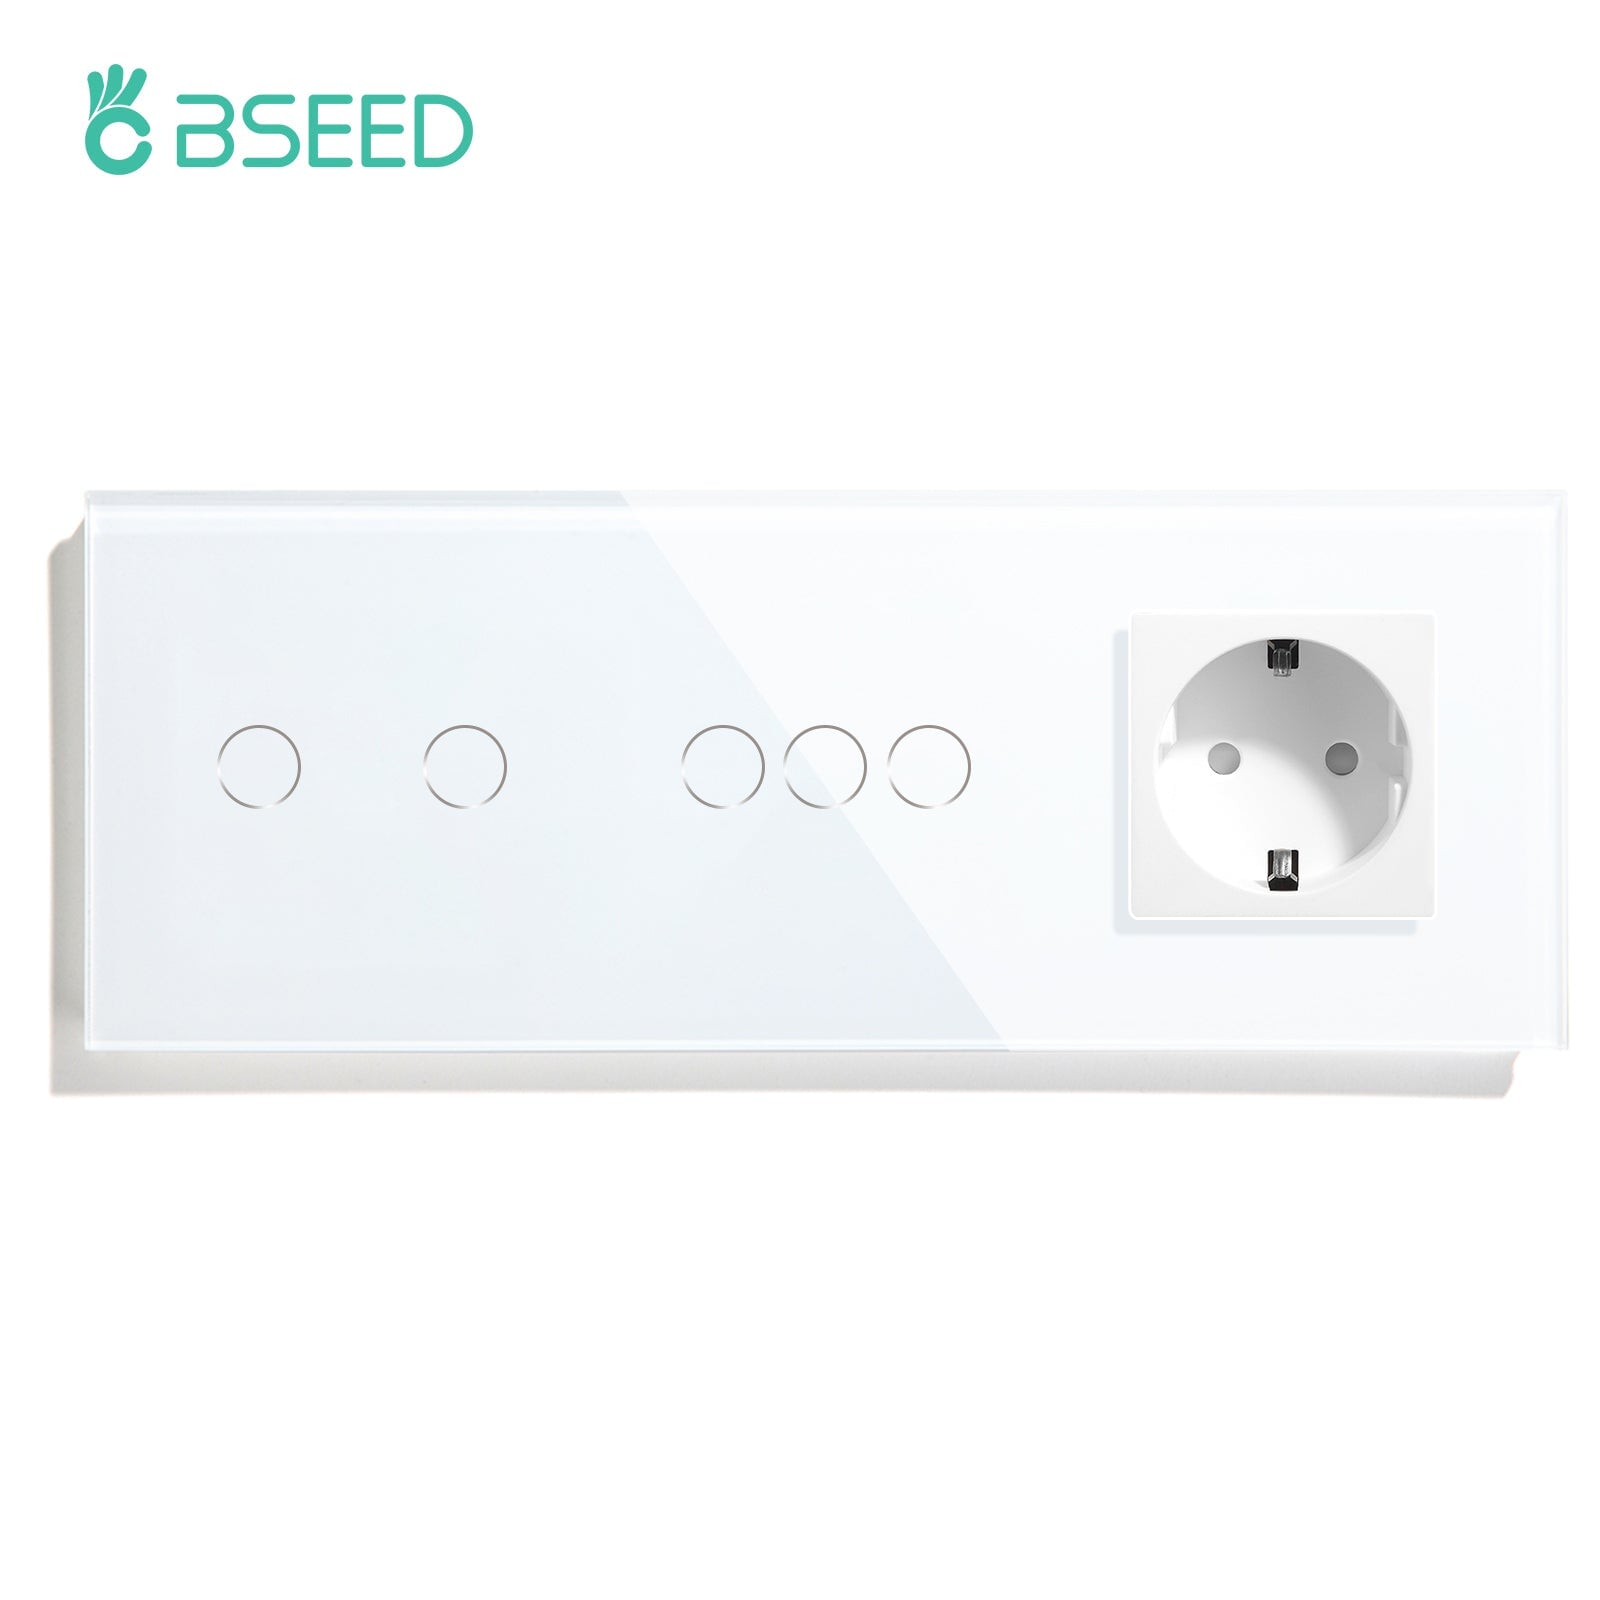 BSEED Double Touch 1/2/3 Gnag 1/2/3 Way Light Switch With EU Socket Power Outlets & Sockets Bseedswitch White 2gang+3gang 1Way